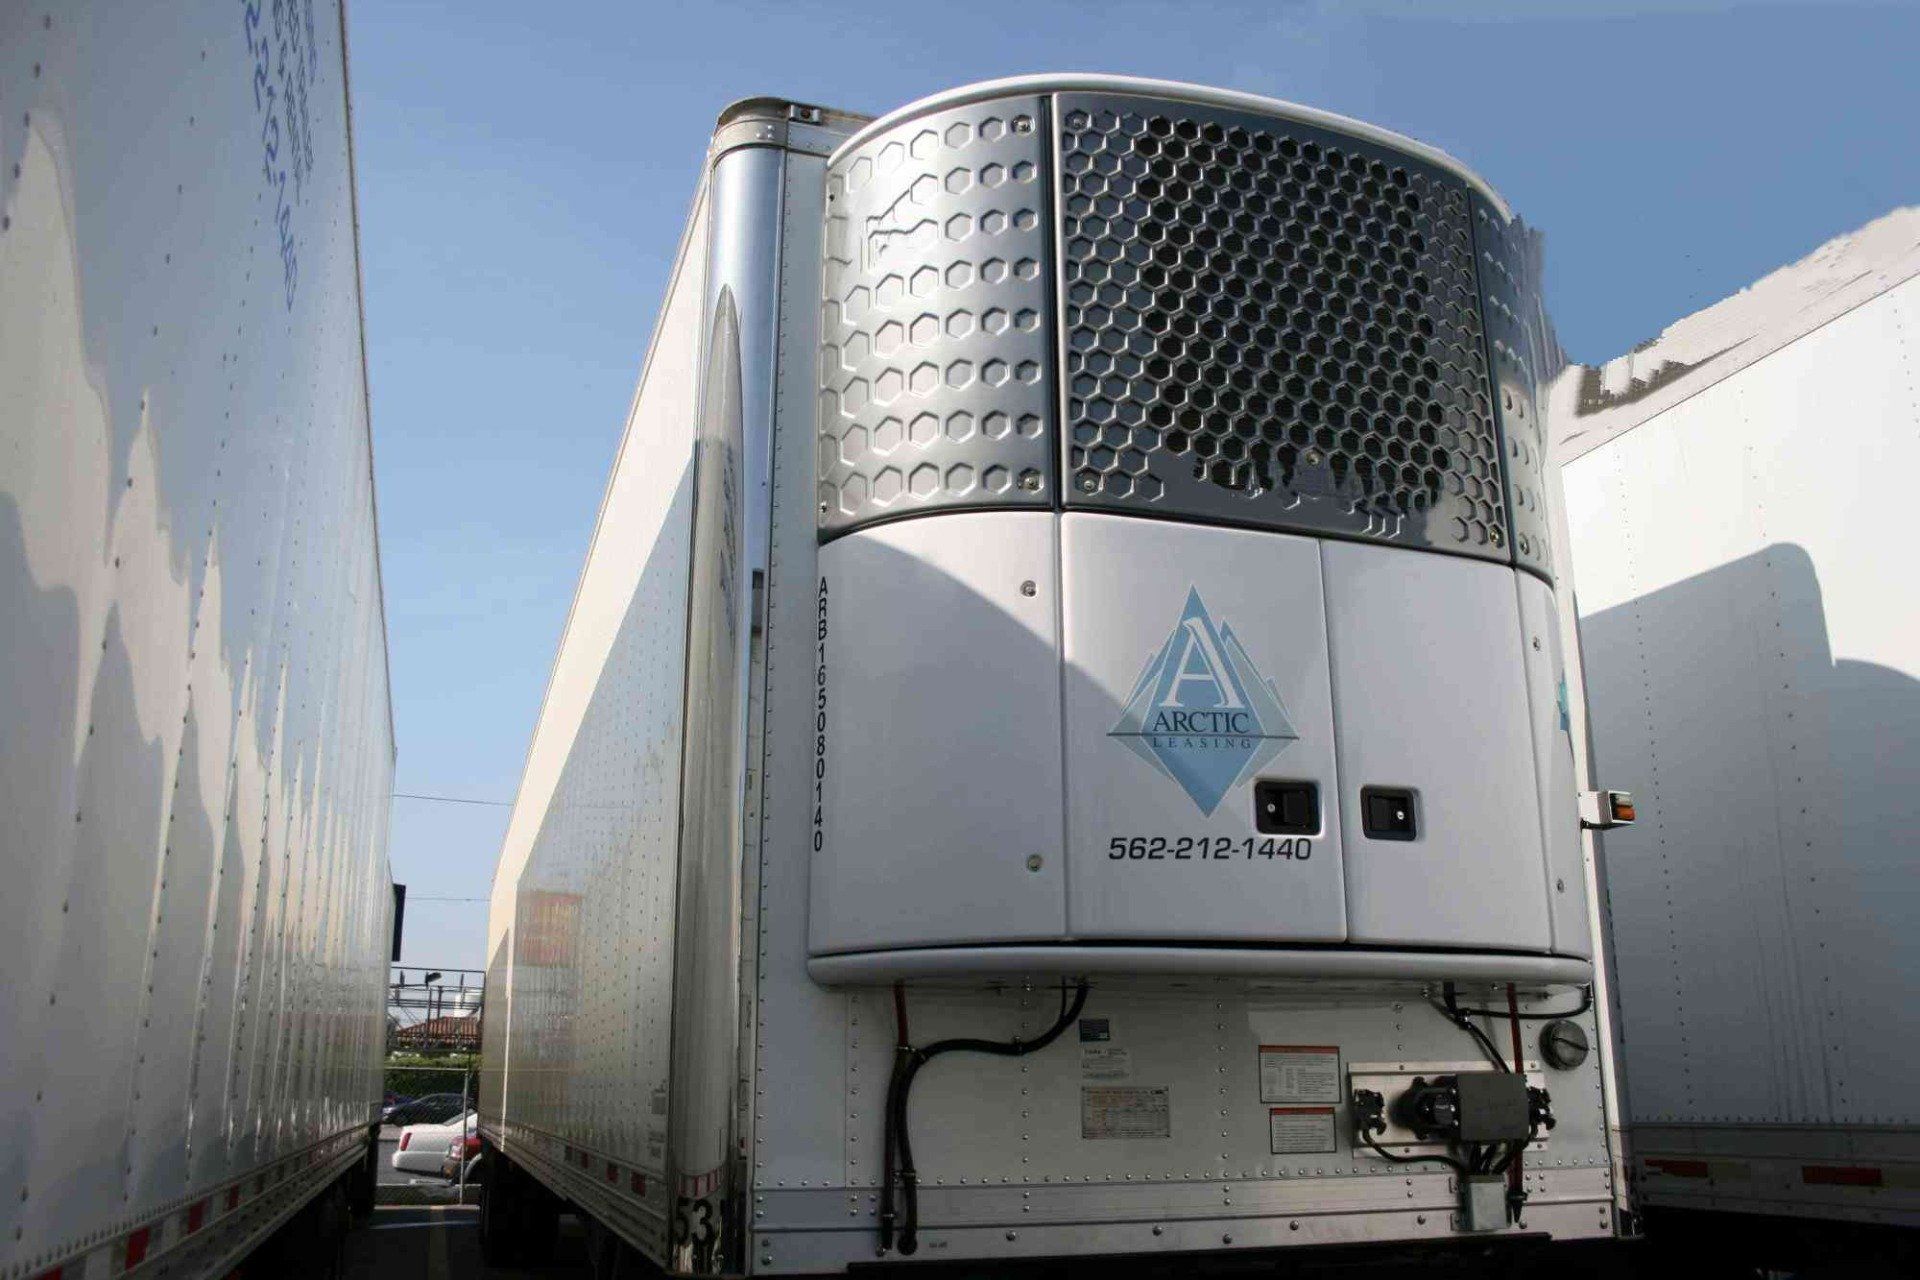 Back Of Refrigerated Trailer — Mobile Refrigerated Trailer Repairs — Arctic Services 562-212-1440